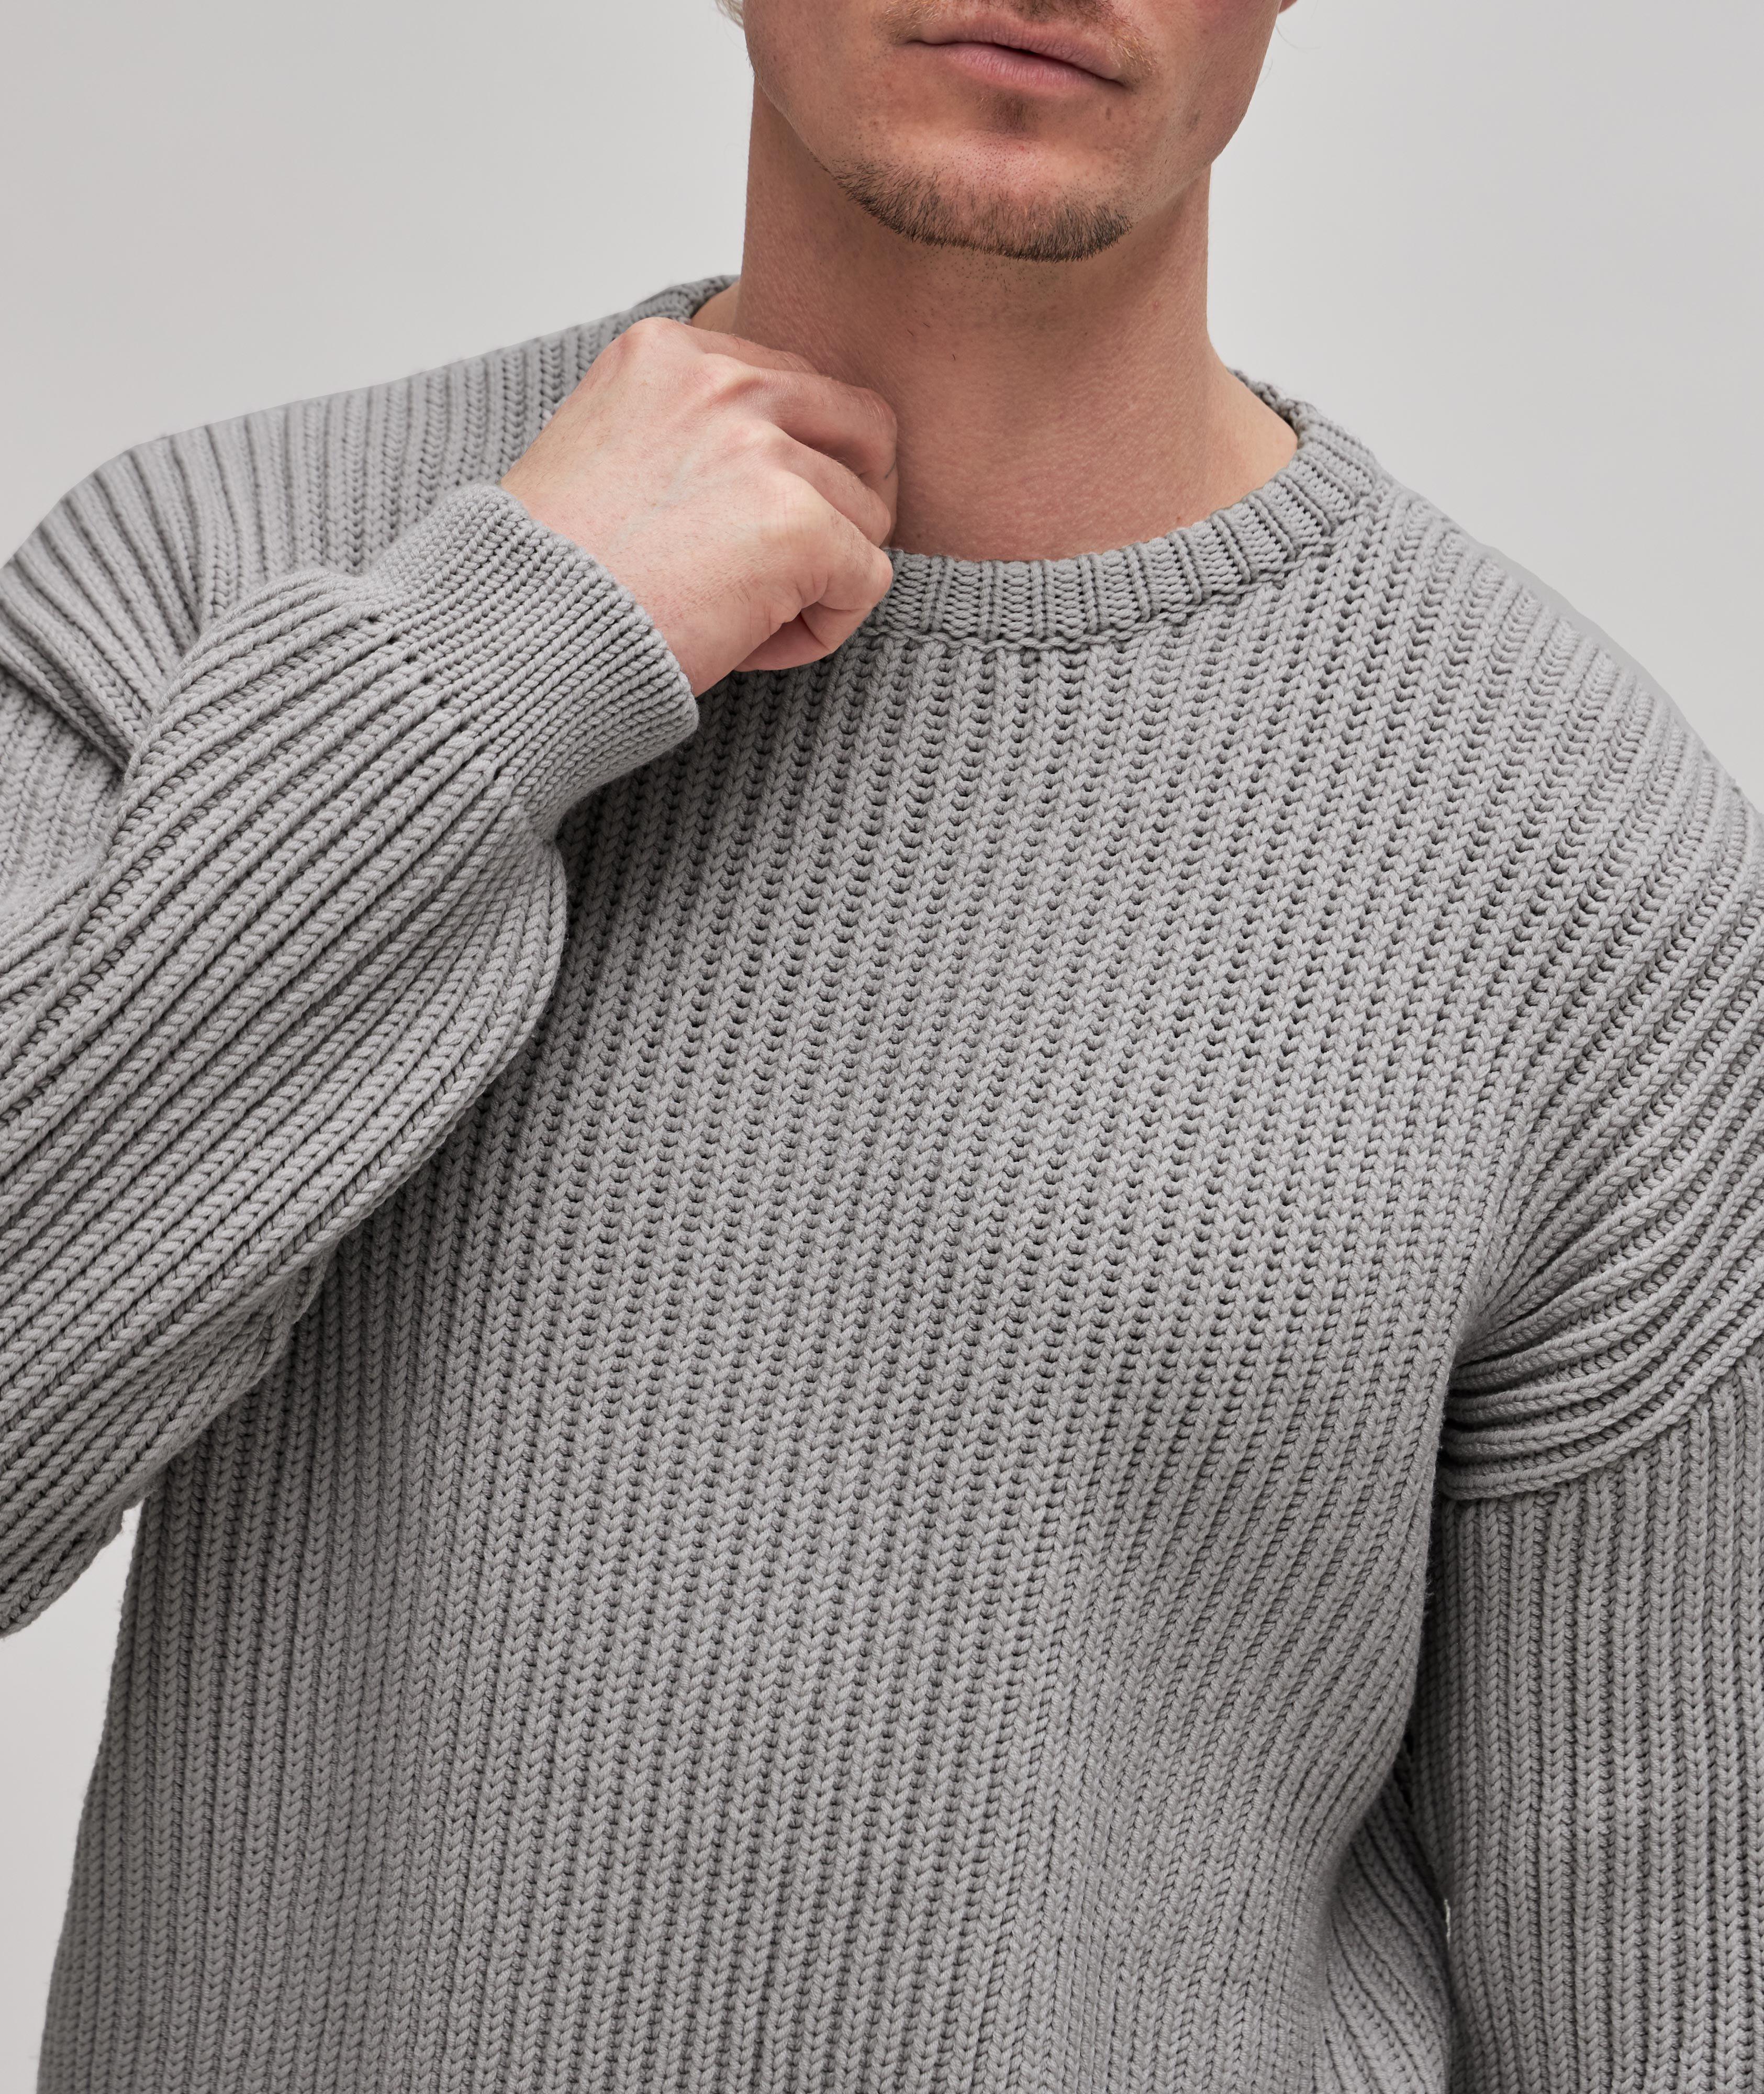 Virgin Wool Thick Rib-Knitted Crewneck Sweater image 4